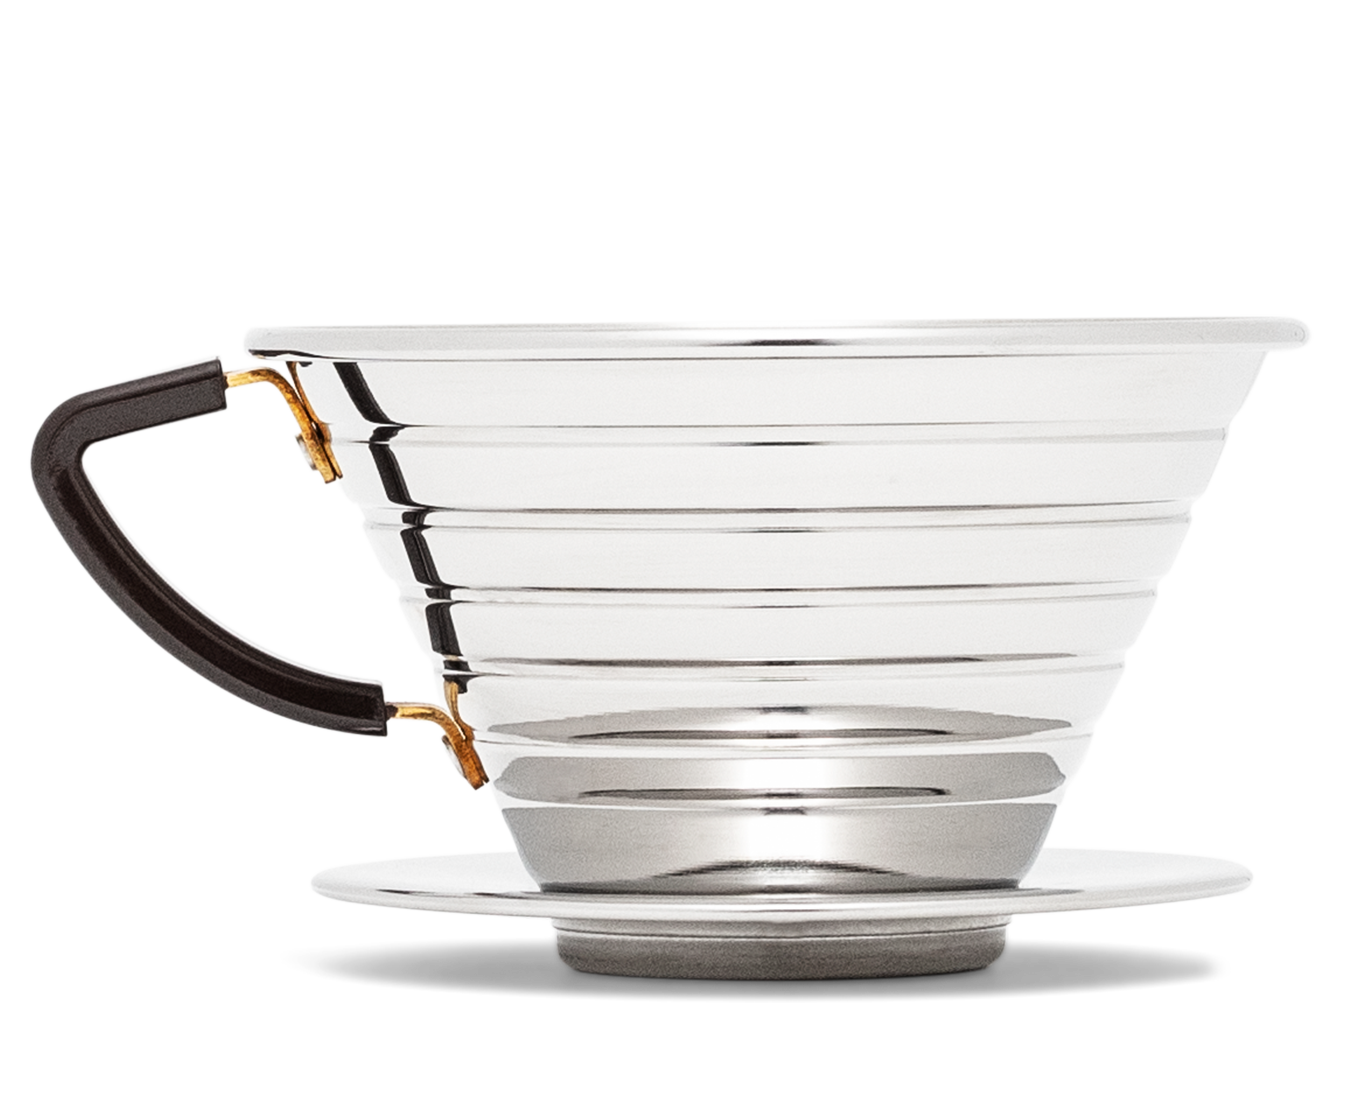 Kalita Wave Review The Entry Level Pour Over Brew